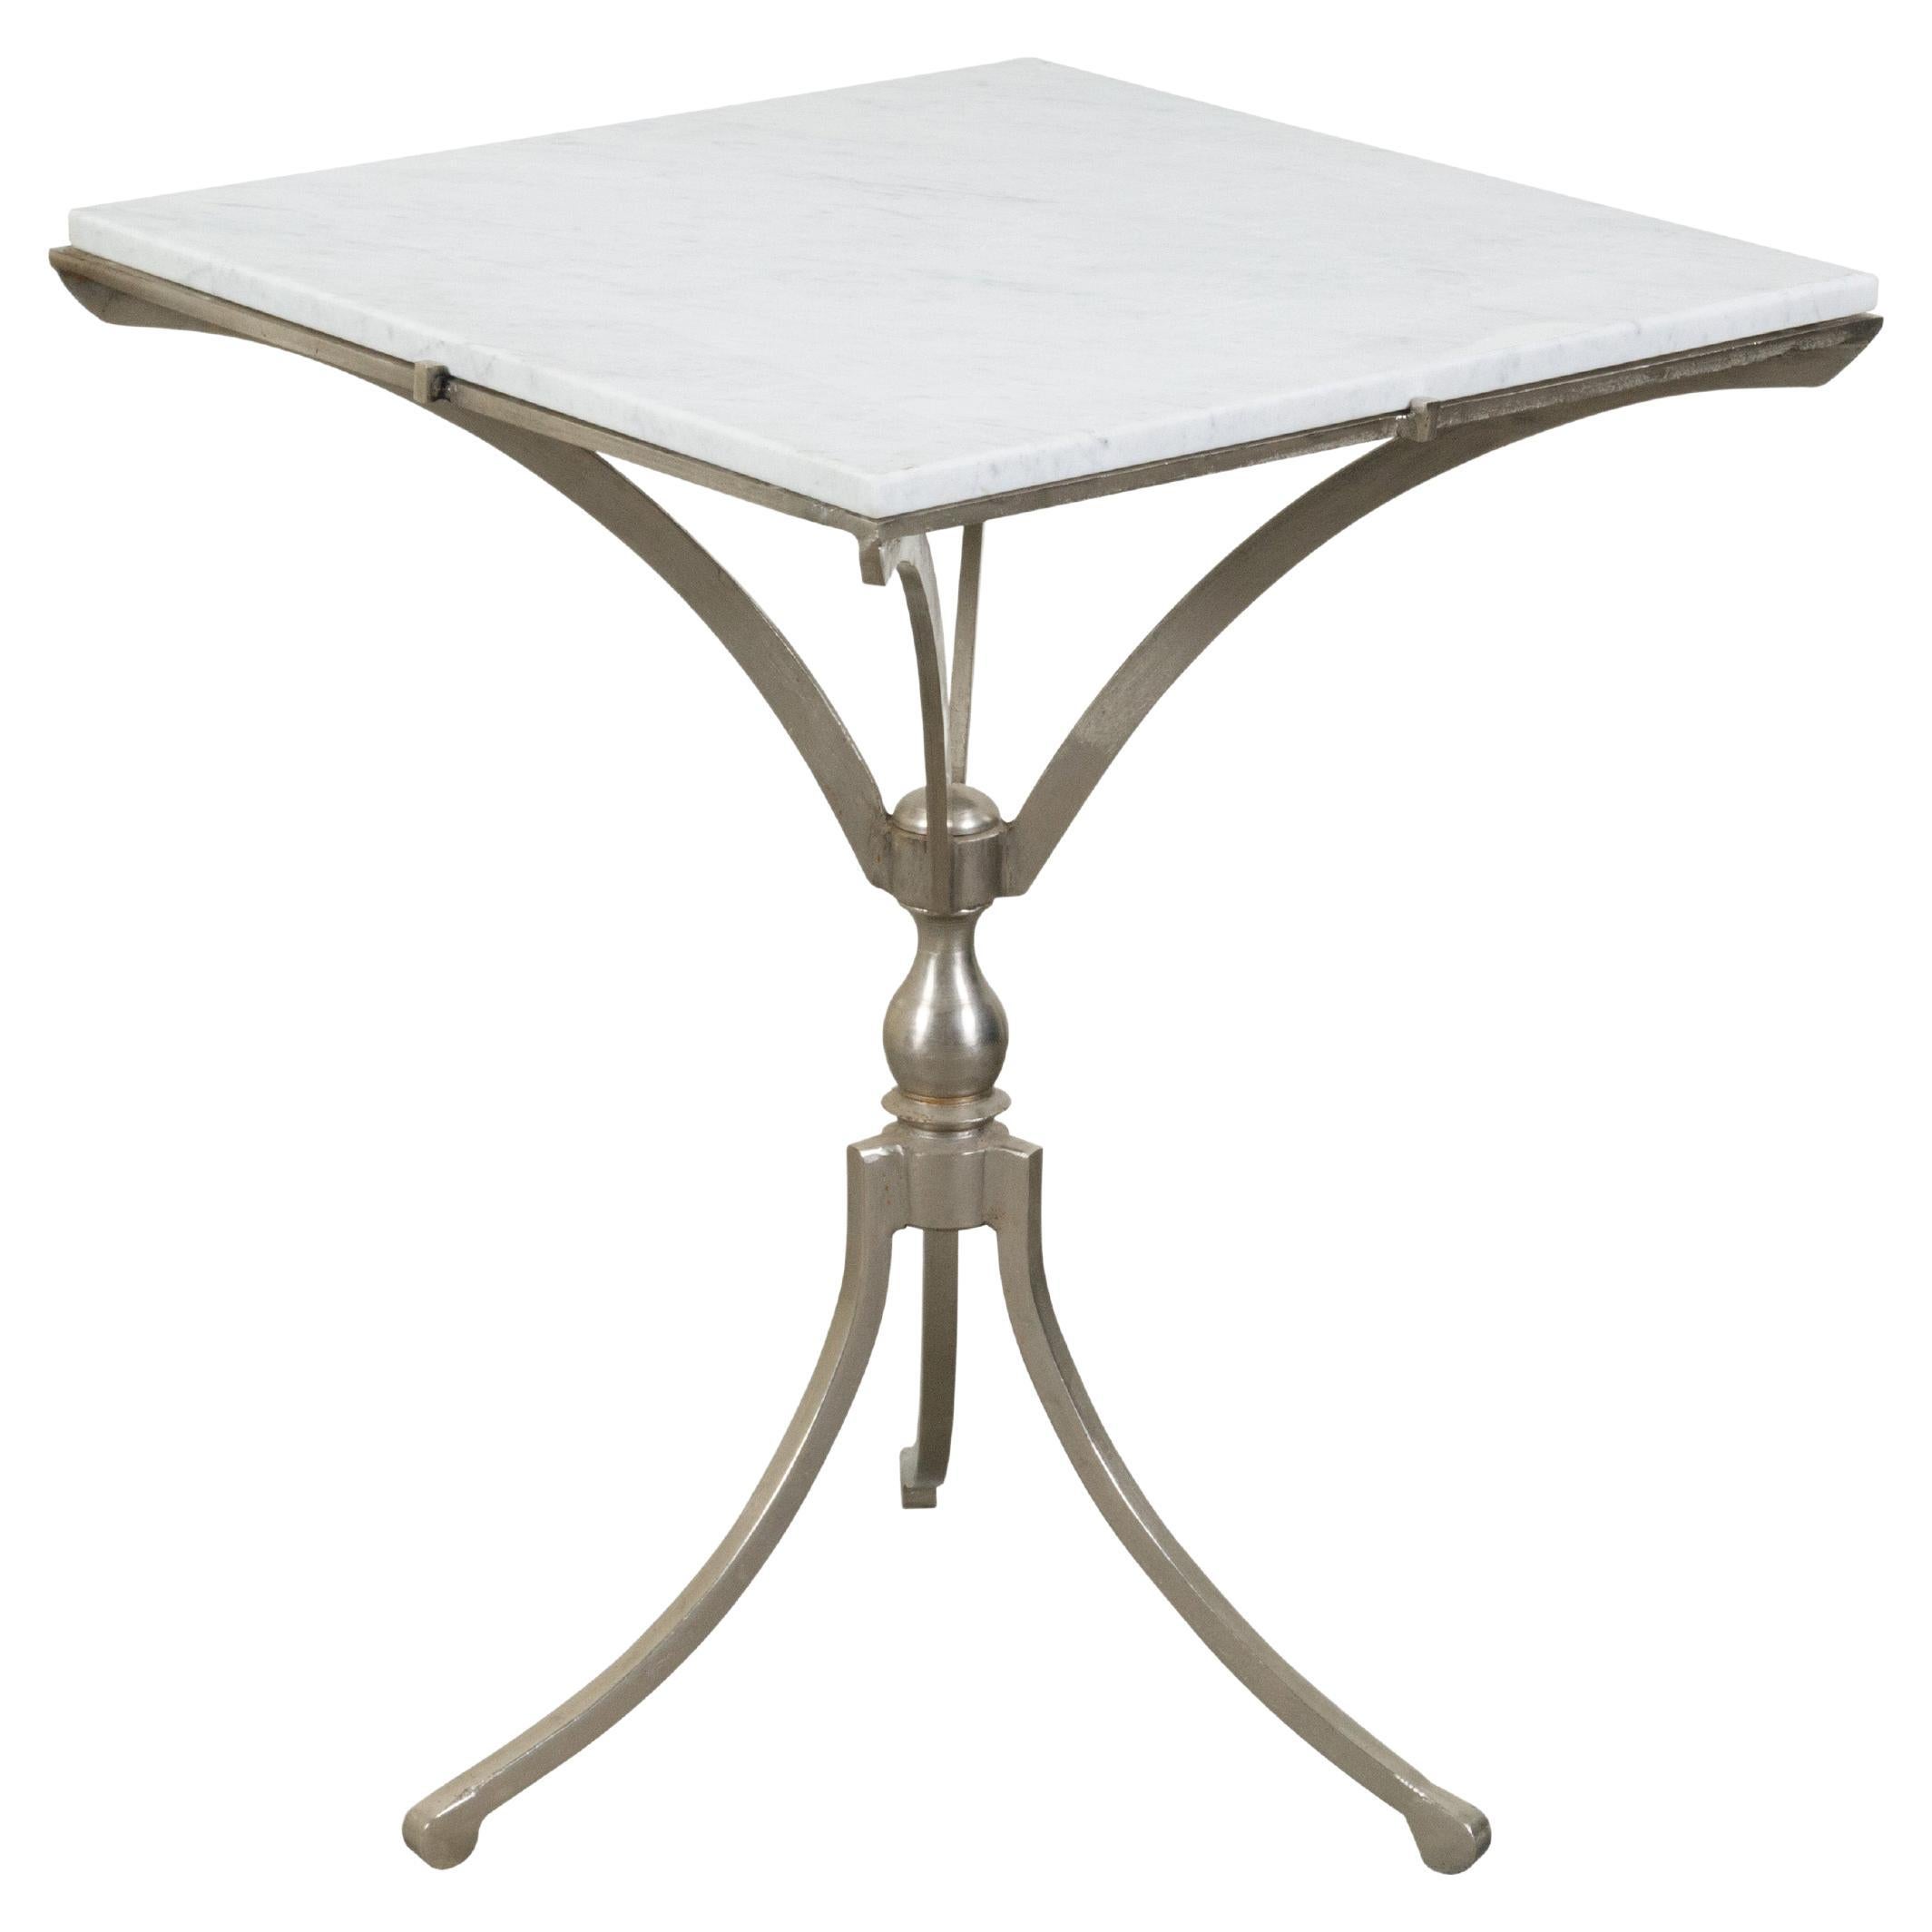 Italian Midcentury Steel Table with White Marble Top and Tripod Base For Sale